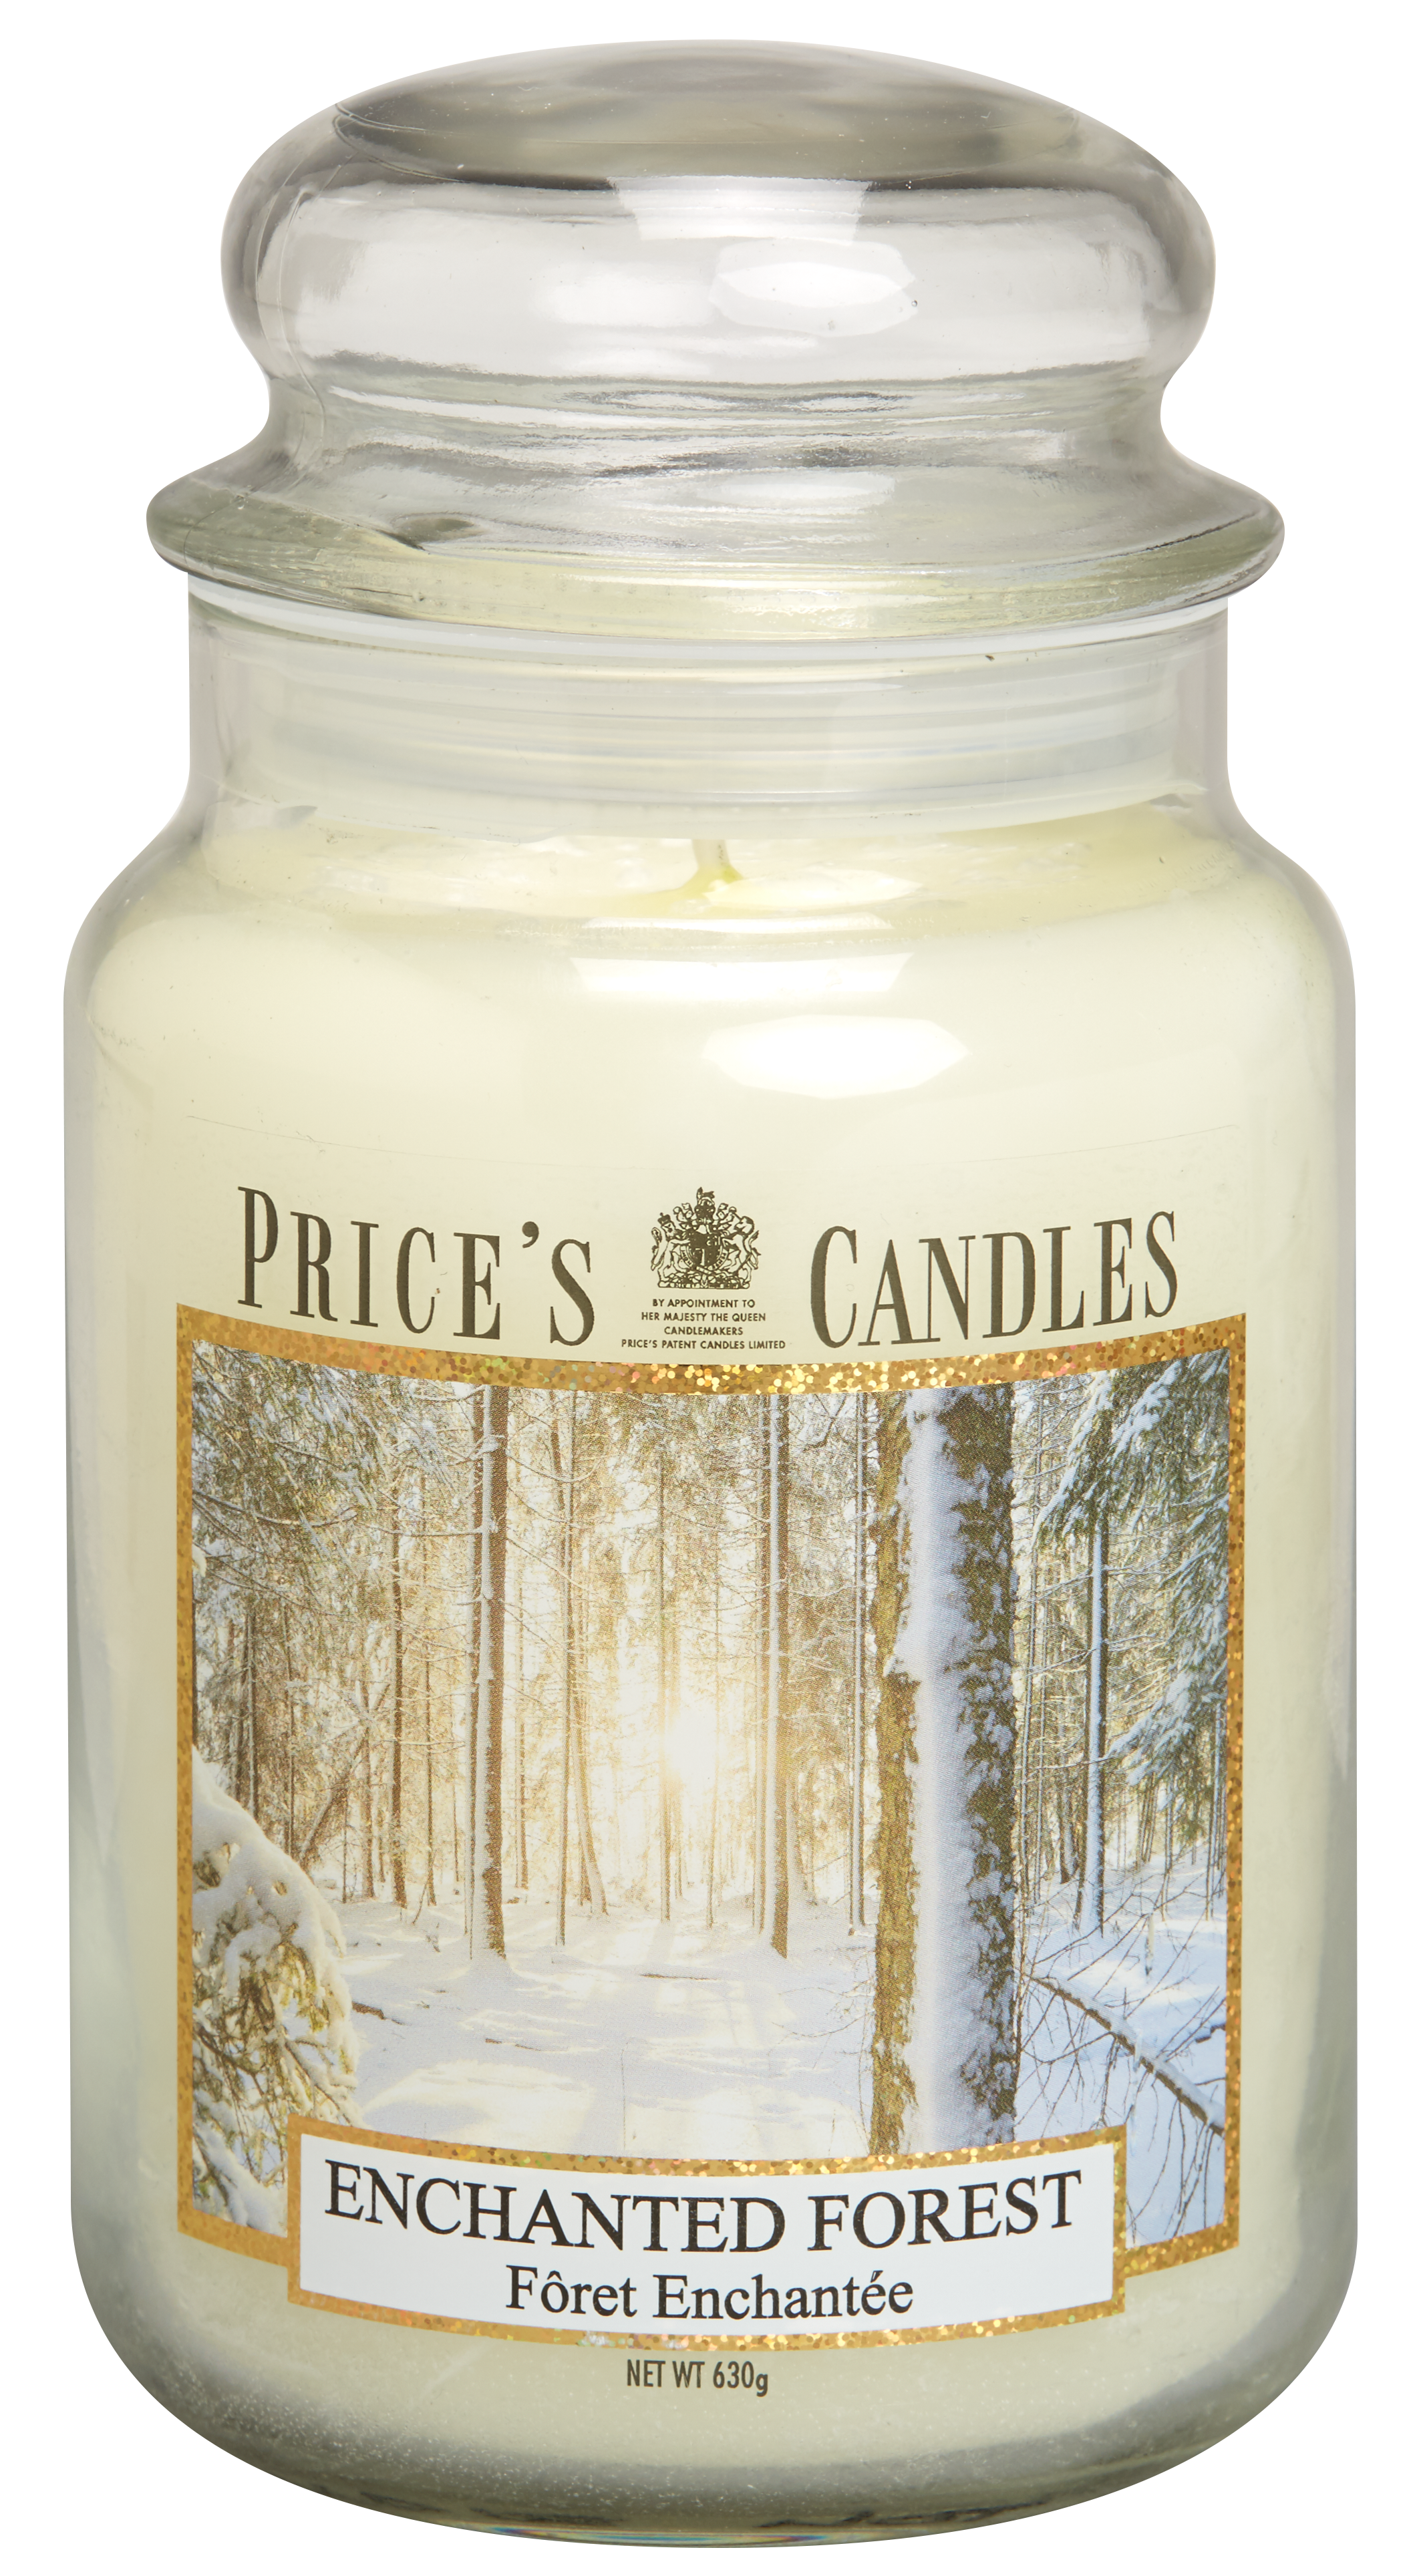 Prices Candle "Enchanted Forest" 630g   